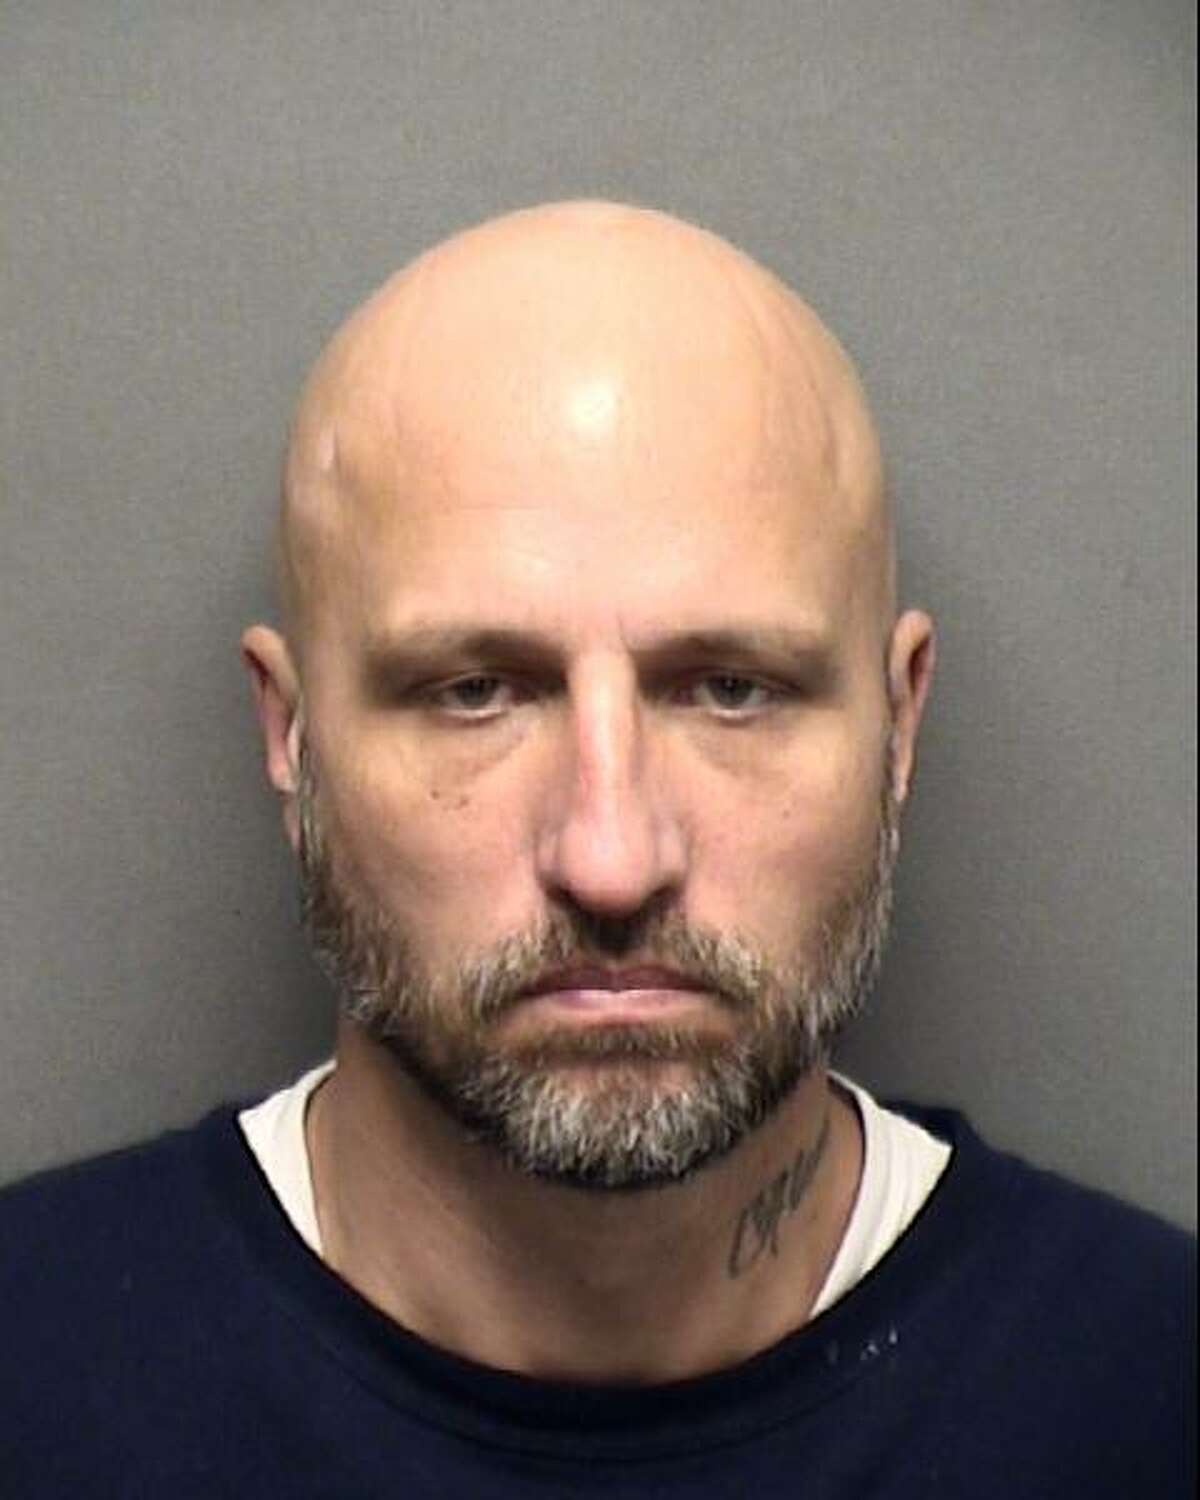 Randall Glen Goodale, 45, is seen in a booking photo dated Dec. 17, 2019. He was fatally shot by members of a federal task force attempting to arrest him on a federal warrant for felony possession of a handgun on Jan. 13, 2020, in the 4400 block of Stetson View, according to San Antonio Police.